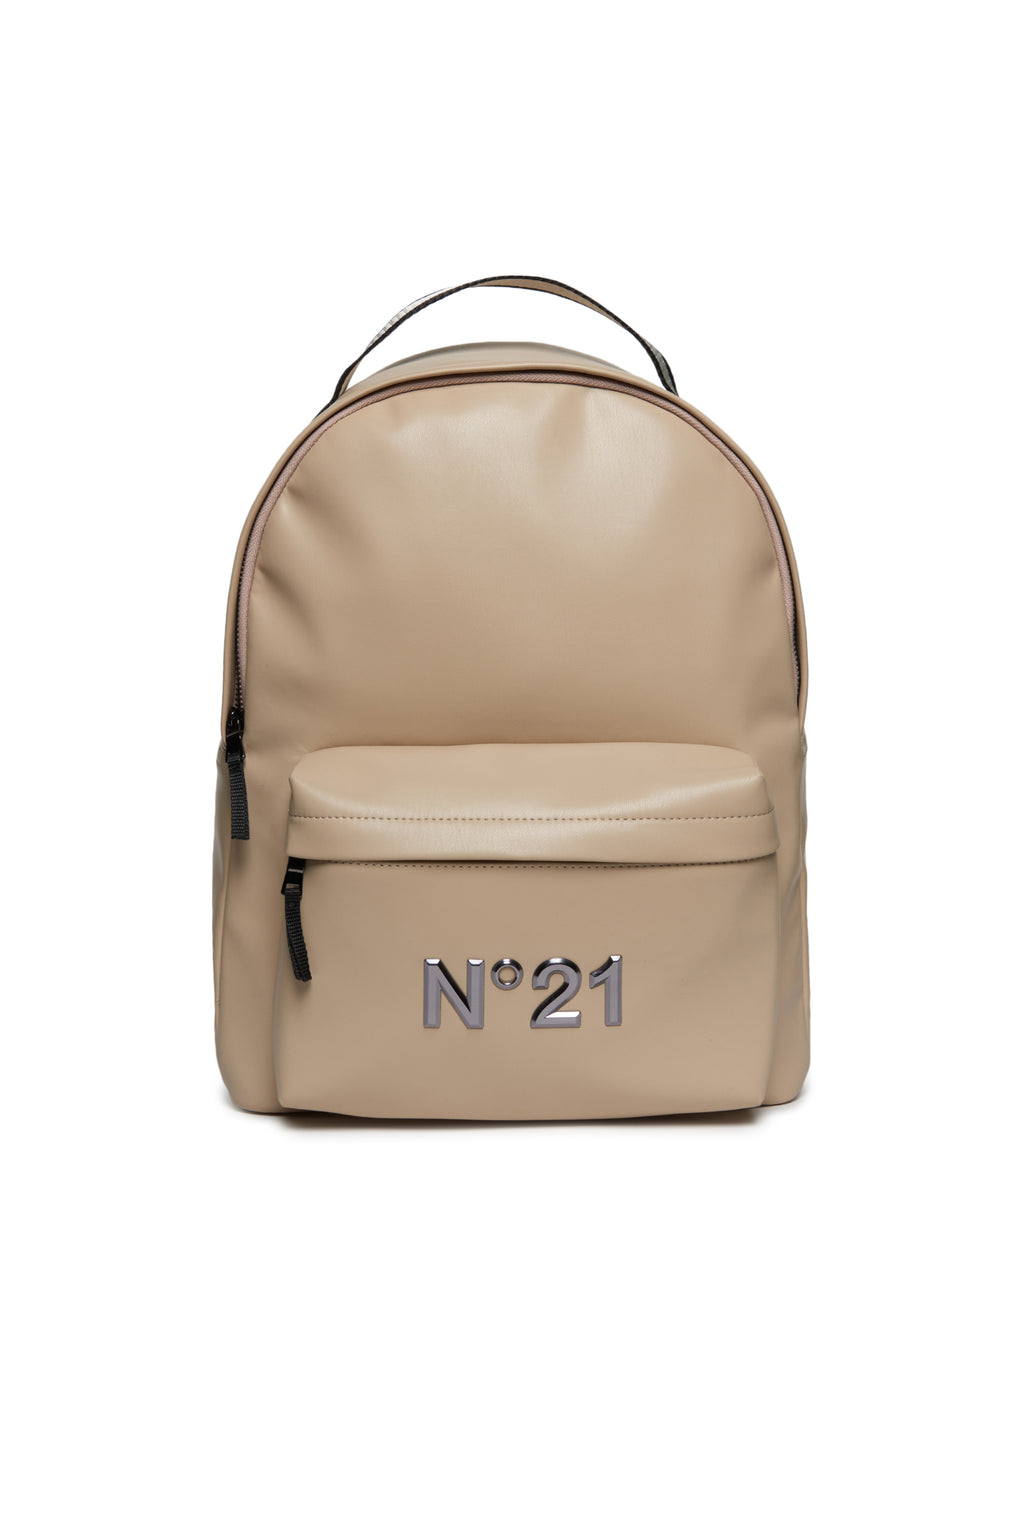 Beige backpack in soft leatherette with logo